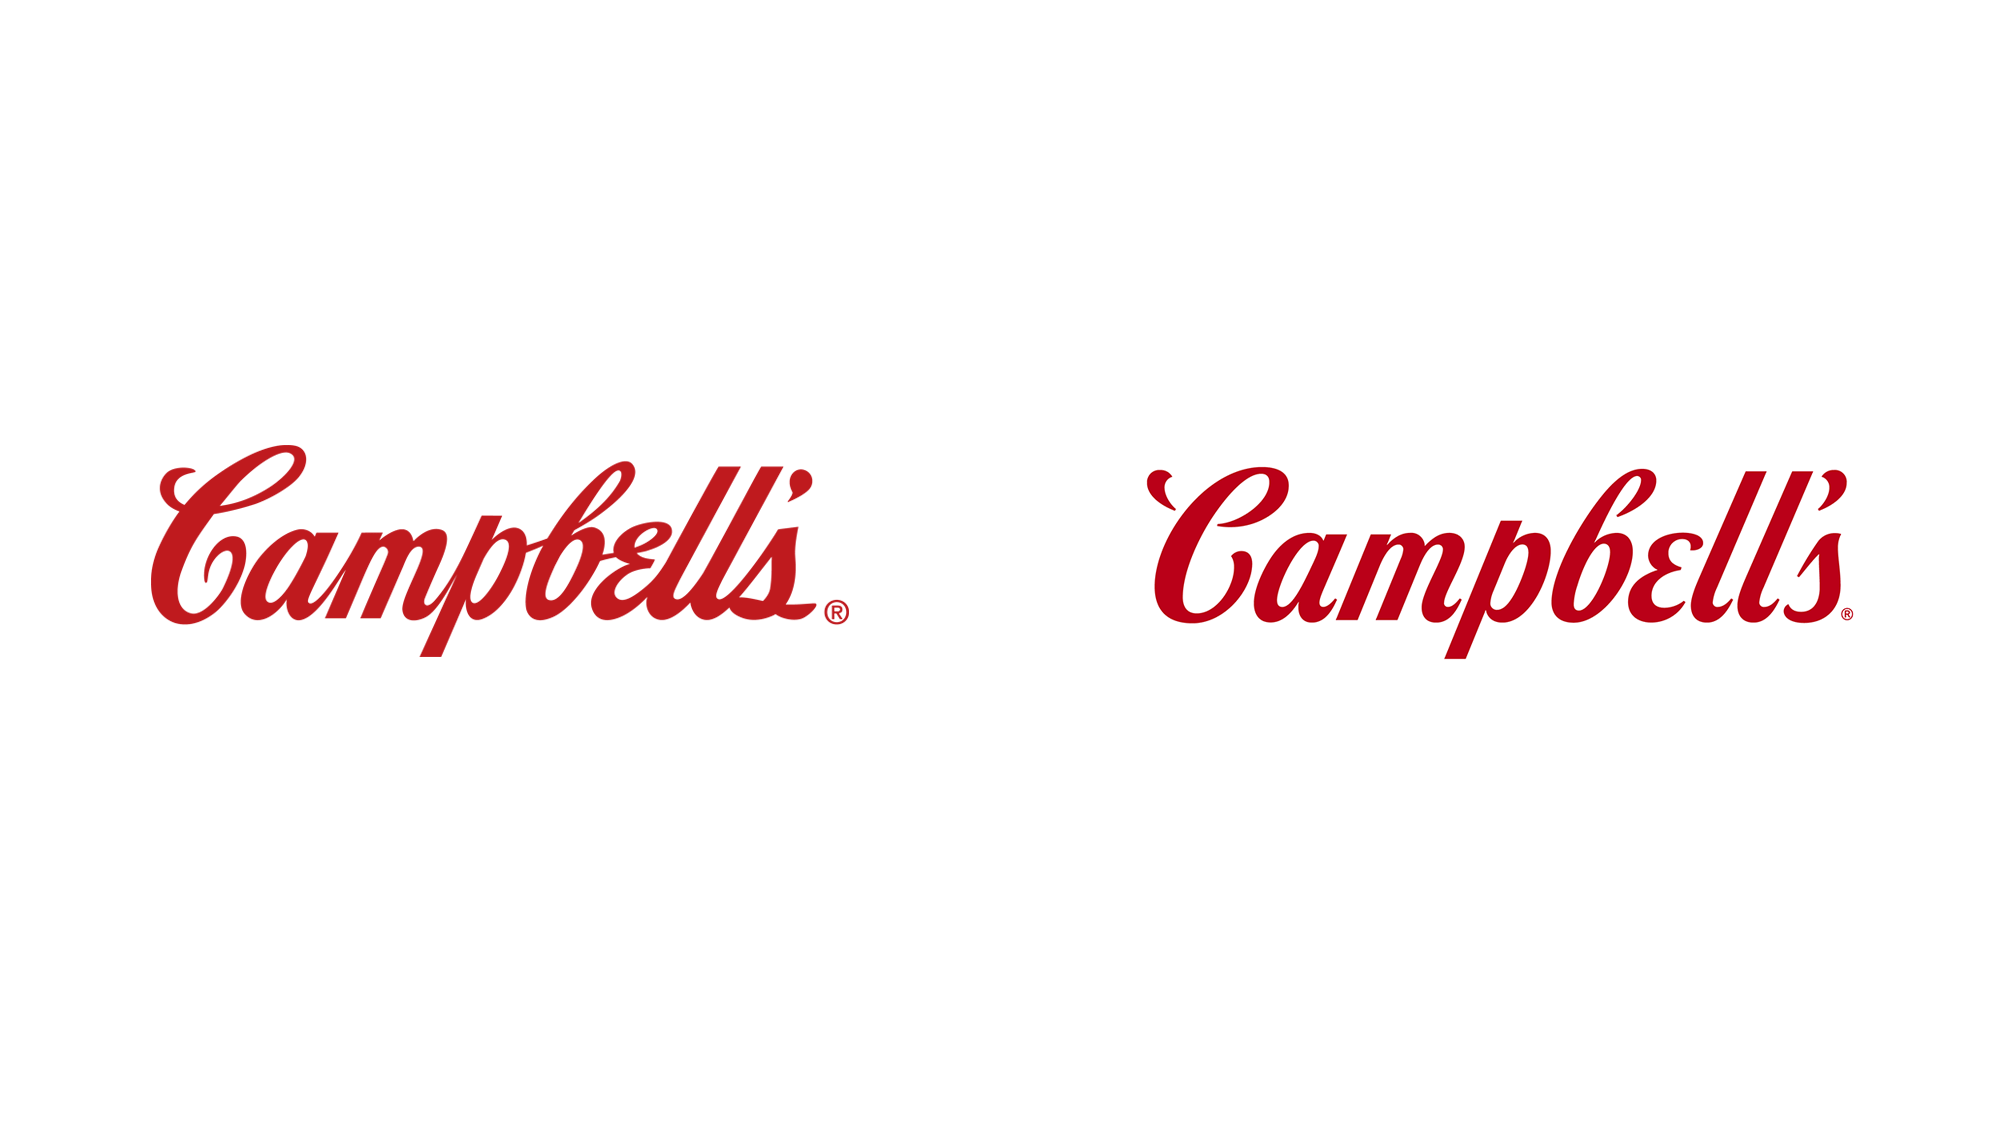 Campbell’s by Turner Duckworth and Ian Brignell